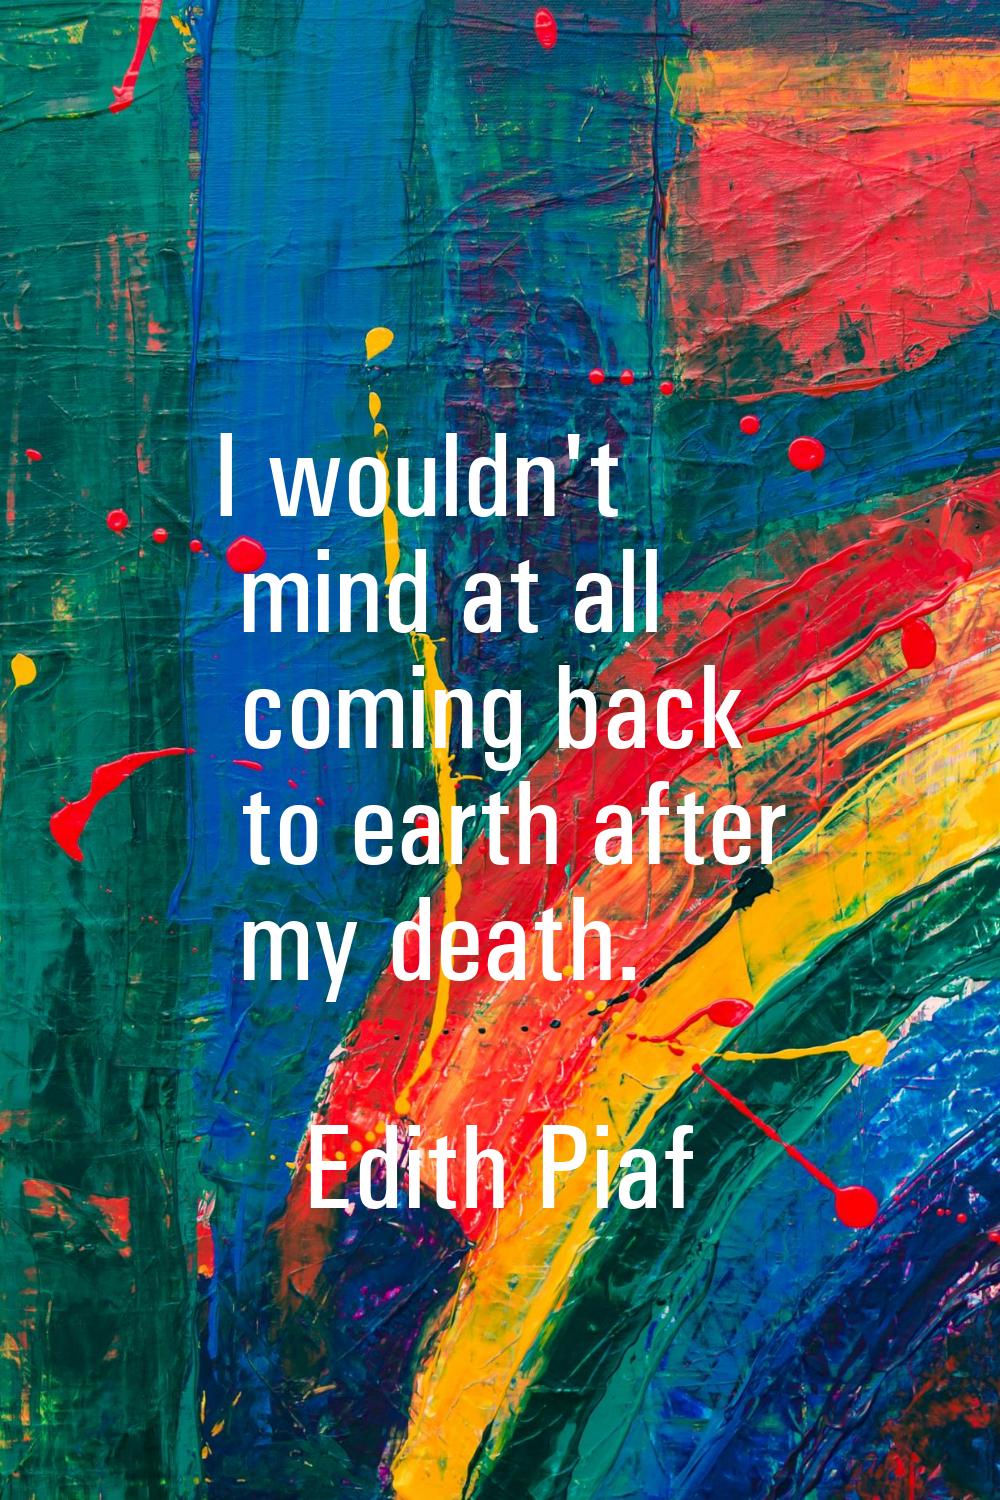 I wouldn't mind at all coming back to earth after my death.